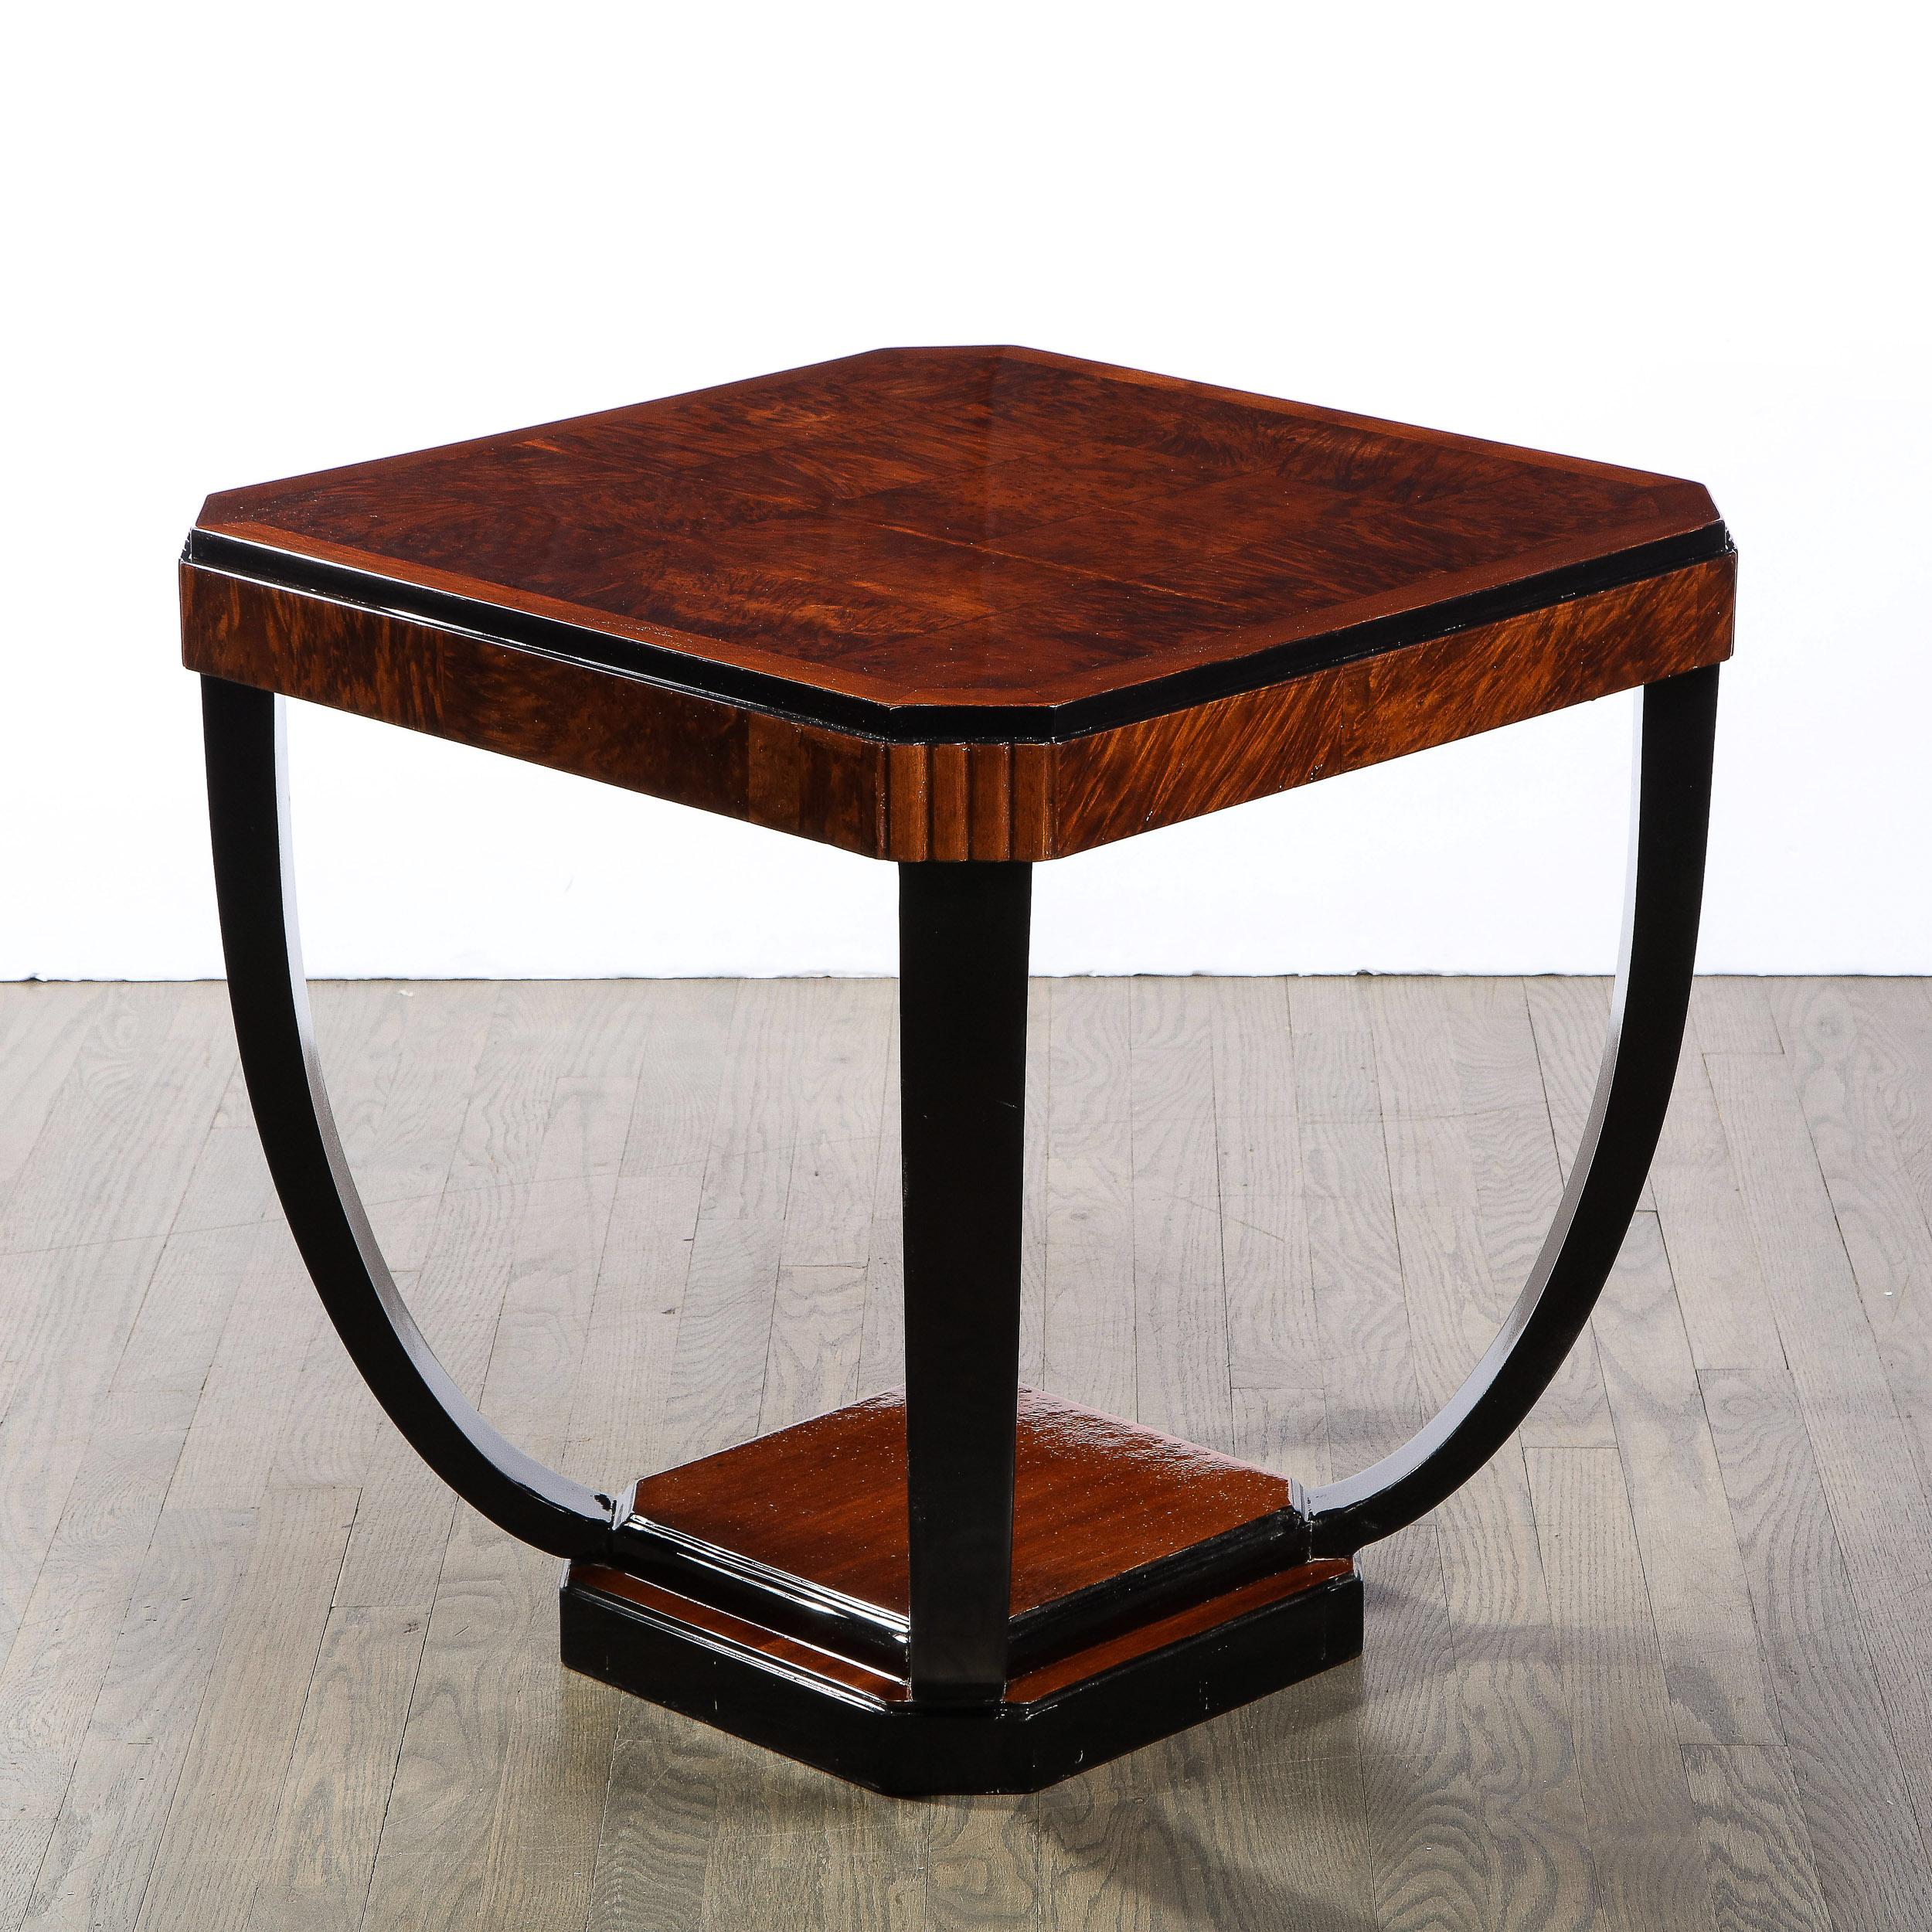 Art Deco Streamlined Cocktail Table in Bookmatched Burled Walnut & Black Lacquer For Sale 2